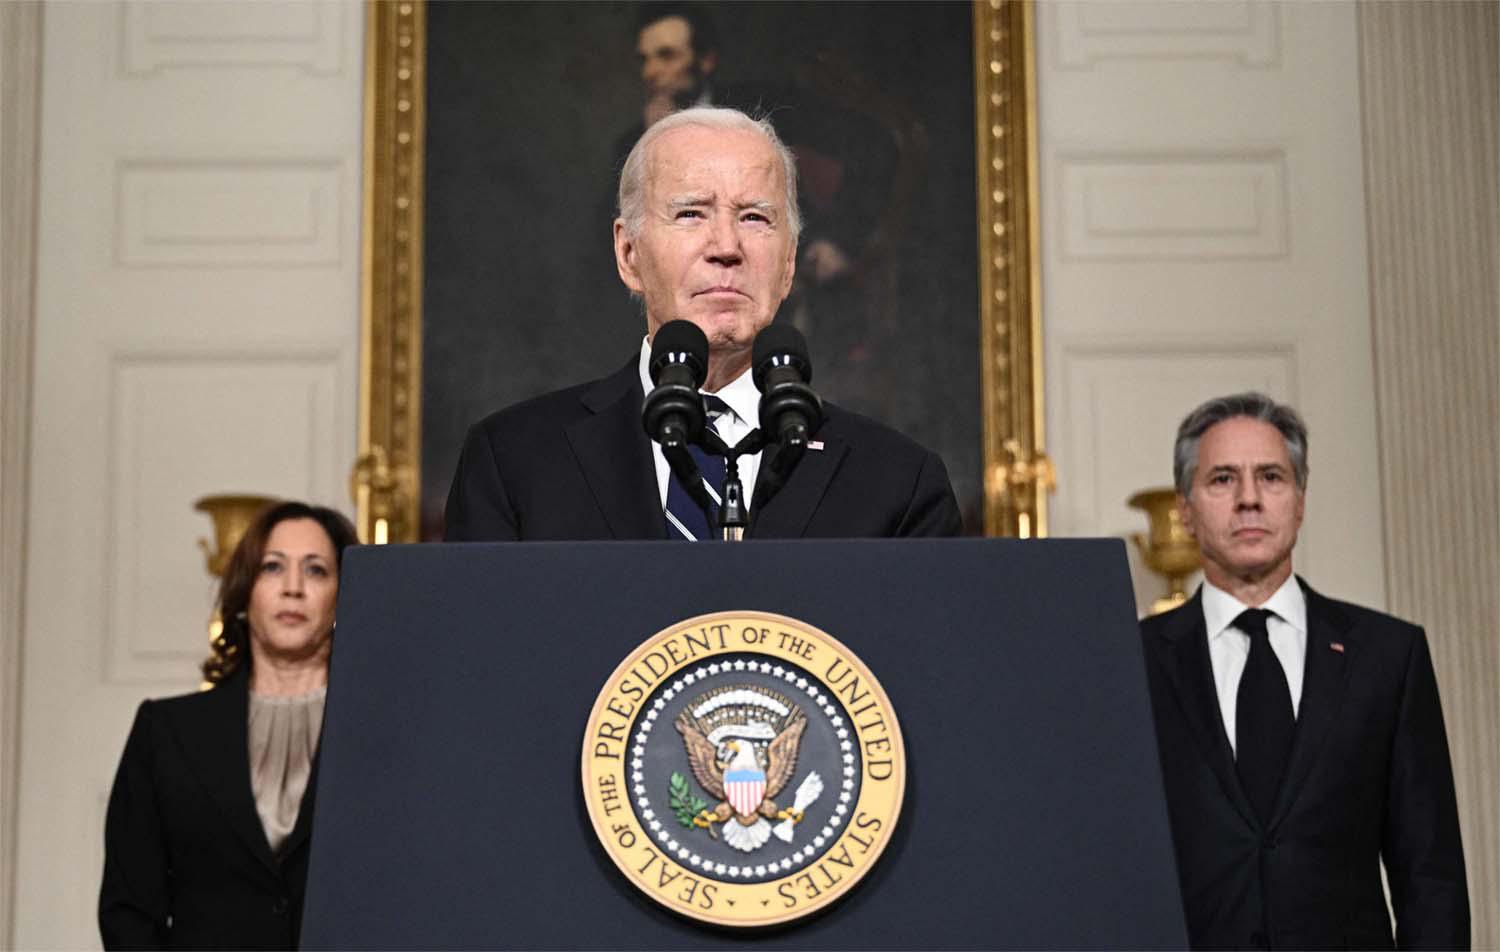 Biden now finds himself thrust into a crisis likely to reshape his Middle East policy